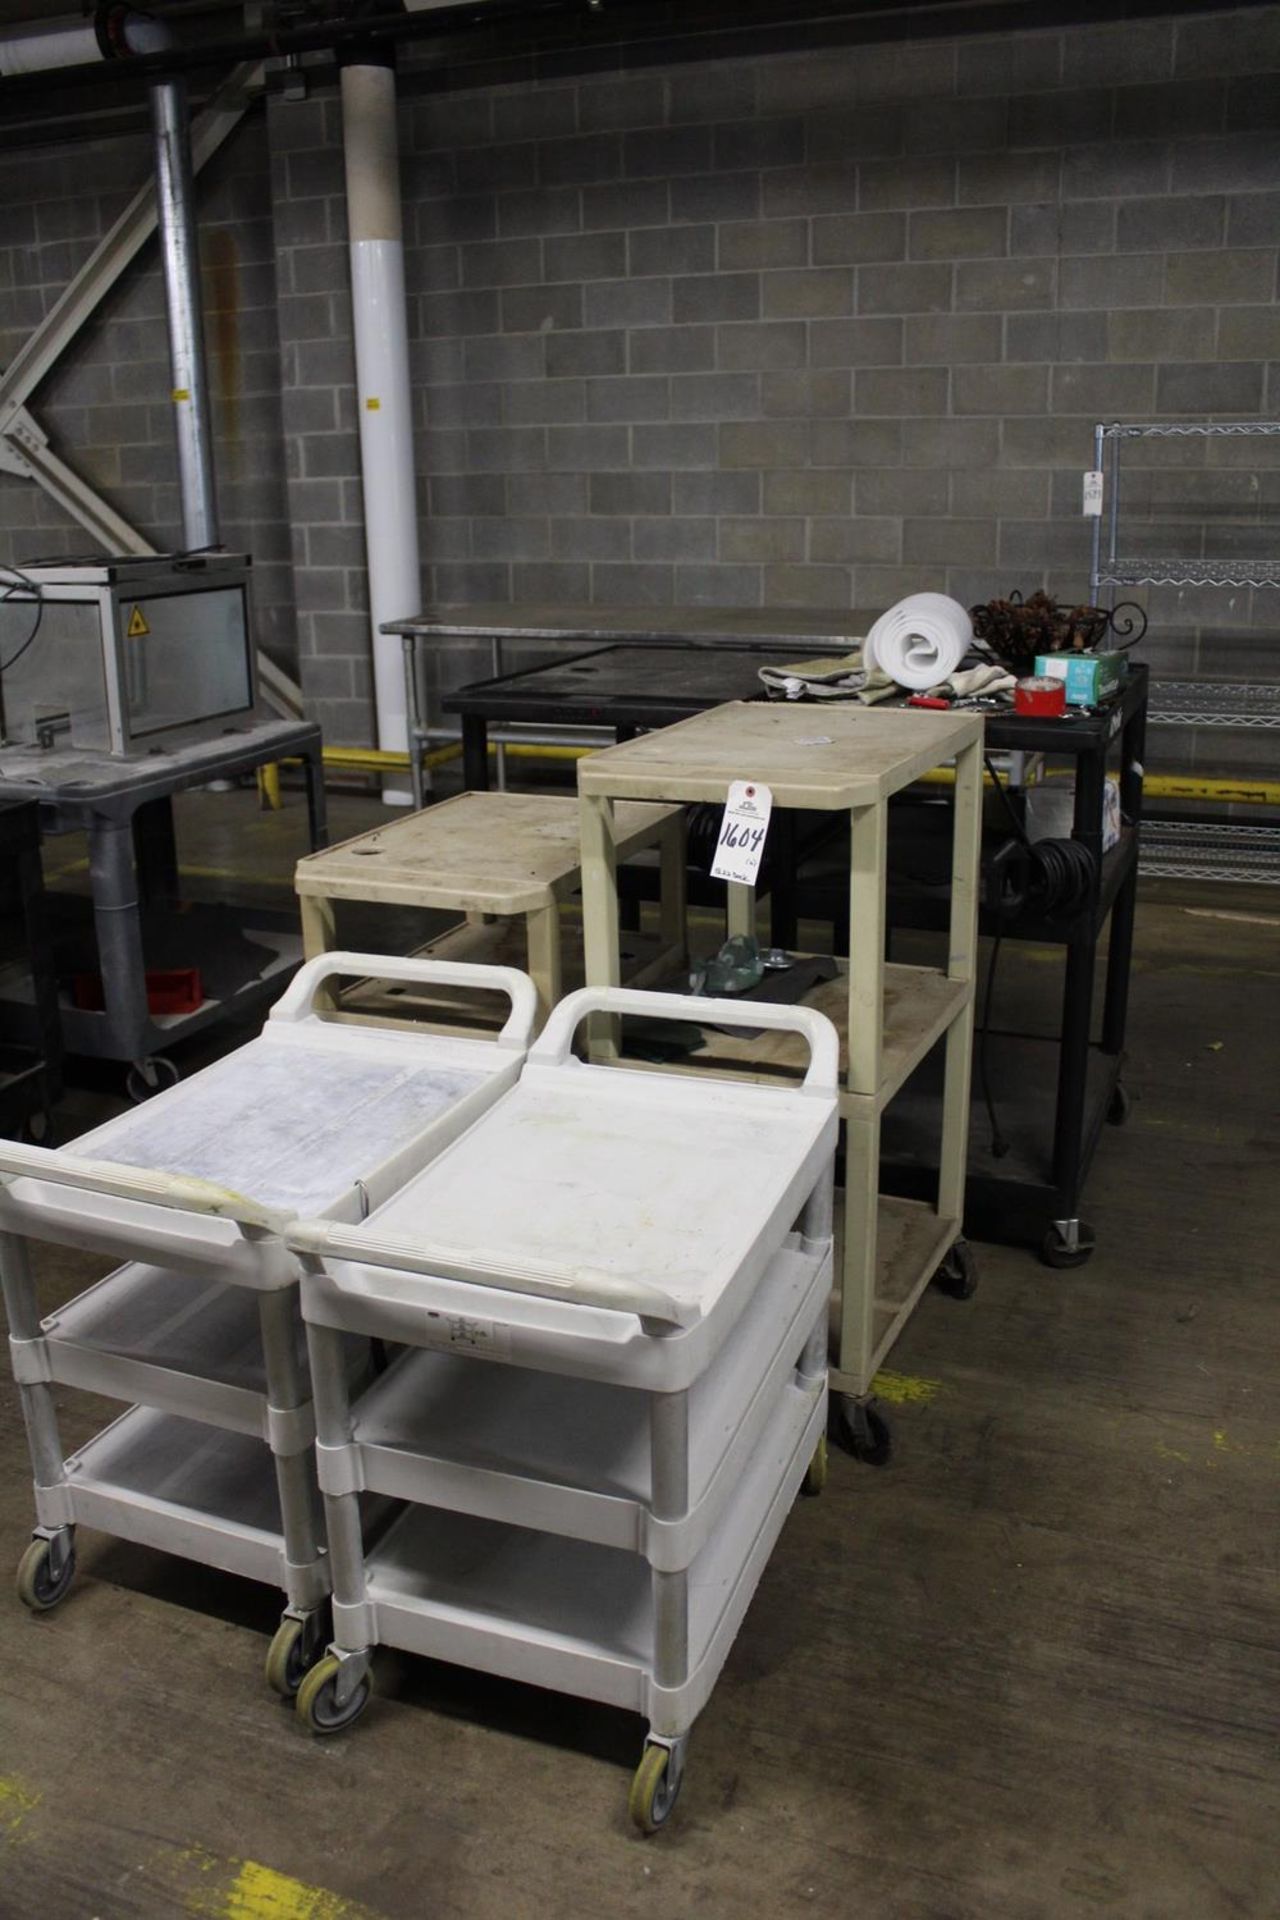 Lot of (6) Shop Carts | Rig Fee: Hand Carry or Contact Rigger